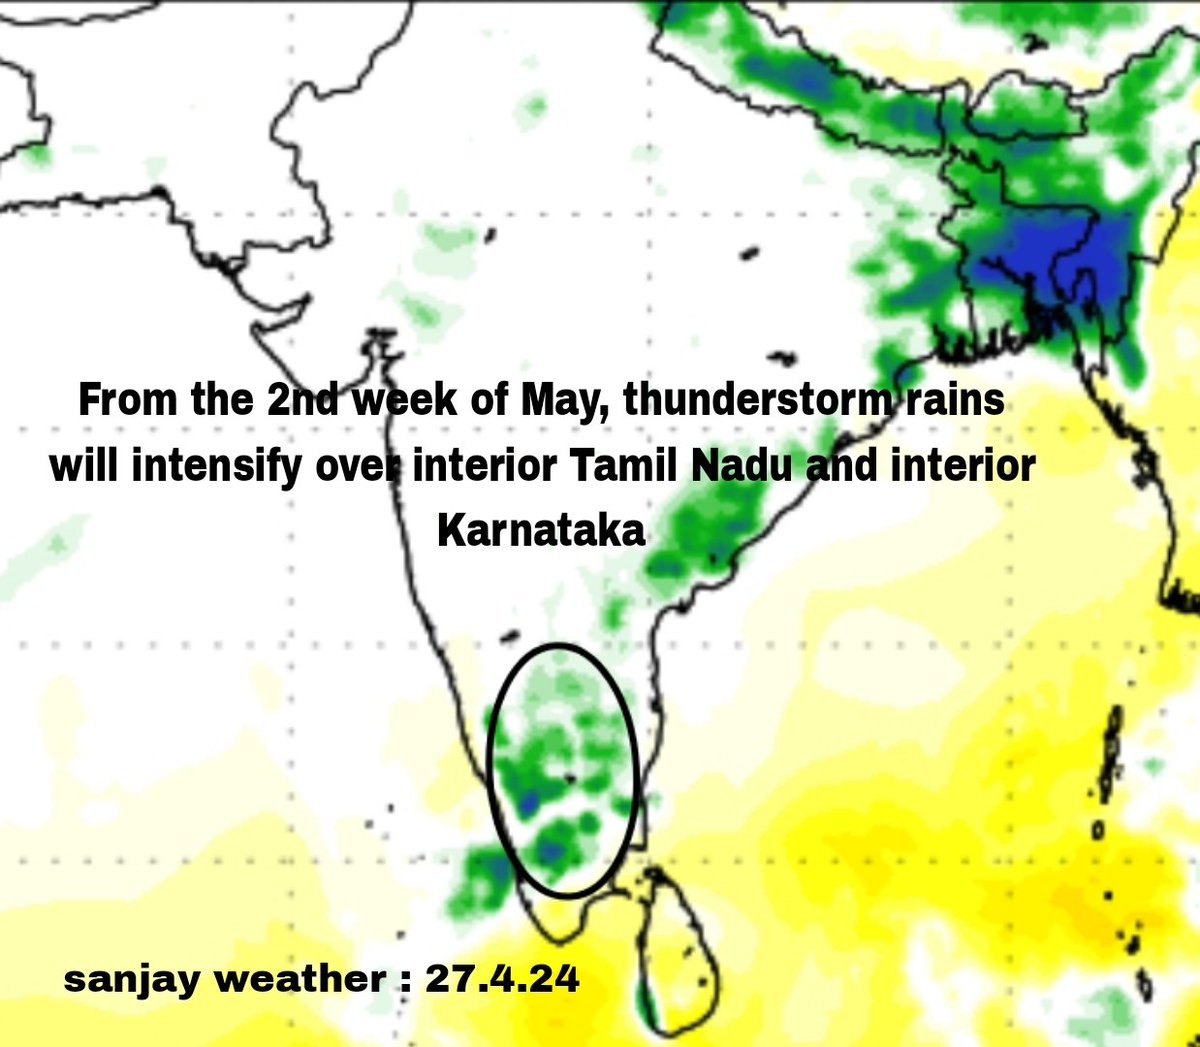 MAY 2nd week 🌨️🌨️
#Thunderstorm rains will intensify from the 2nd week of May over interior parts of #TamilNadu #westernghats and interior parts of #Karnataka Although the temperature will increase during the day, there will be a chance of good rain in the afternoon and evening